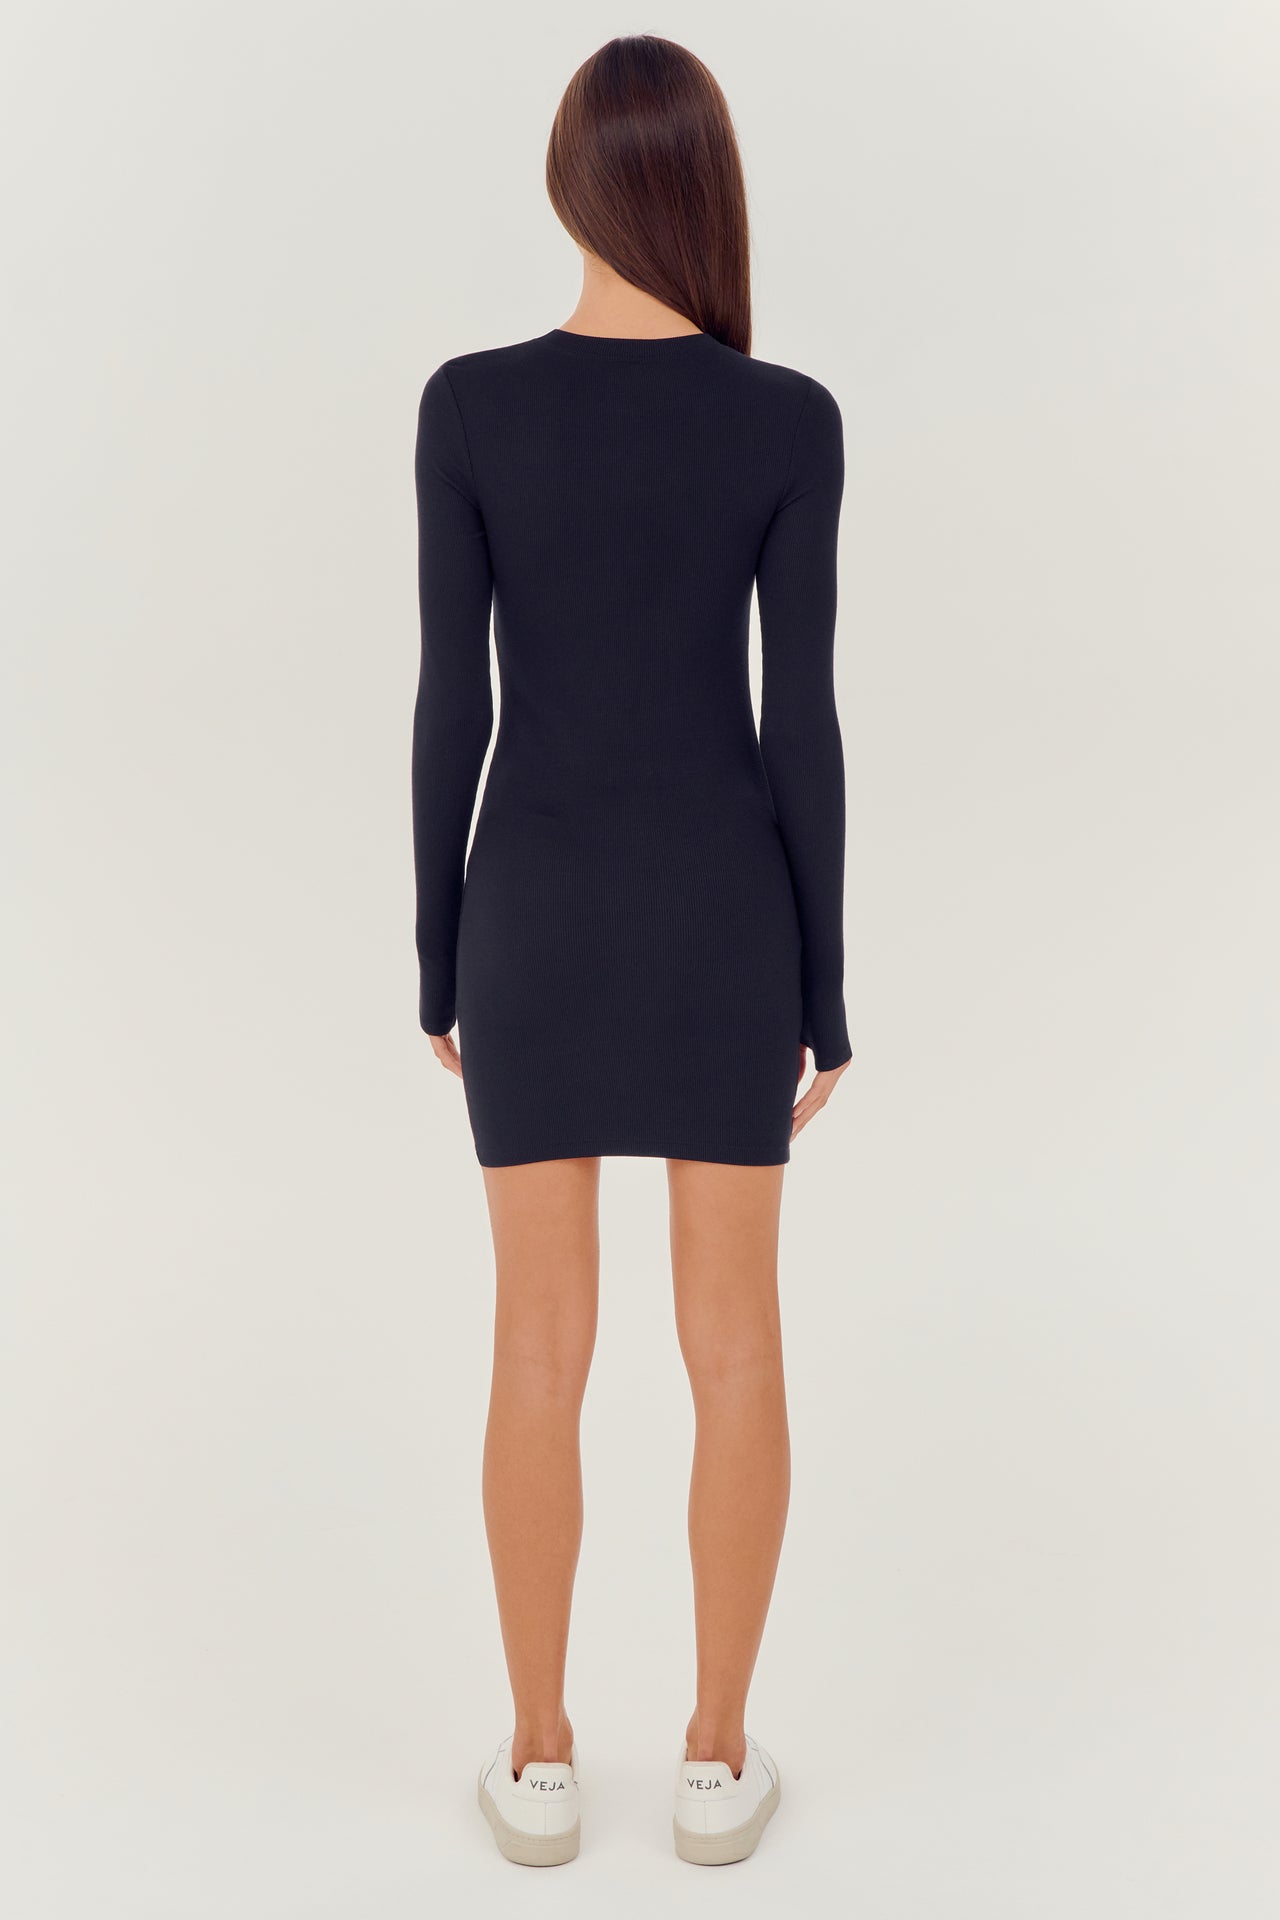 The back view of a woman wearing a SPLITS59 Louise Rib Long Sleeve Dress in Black.